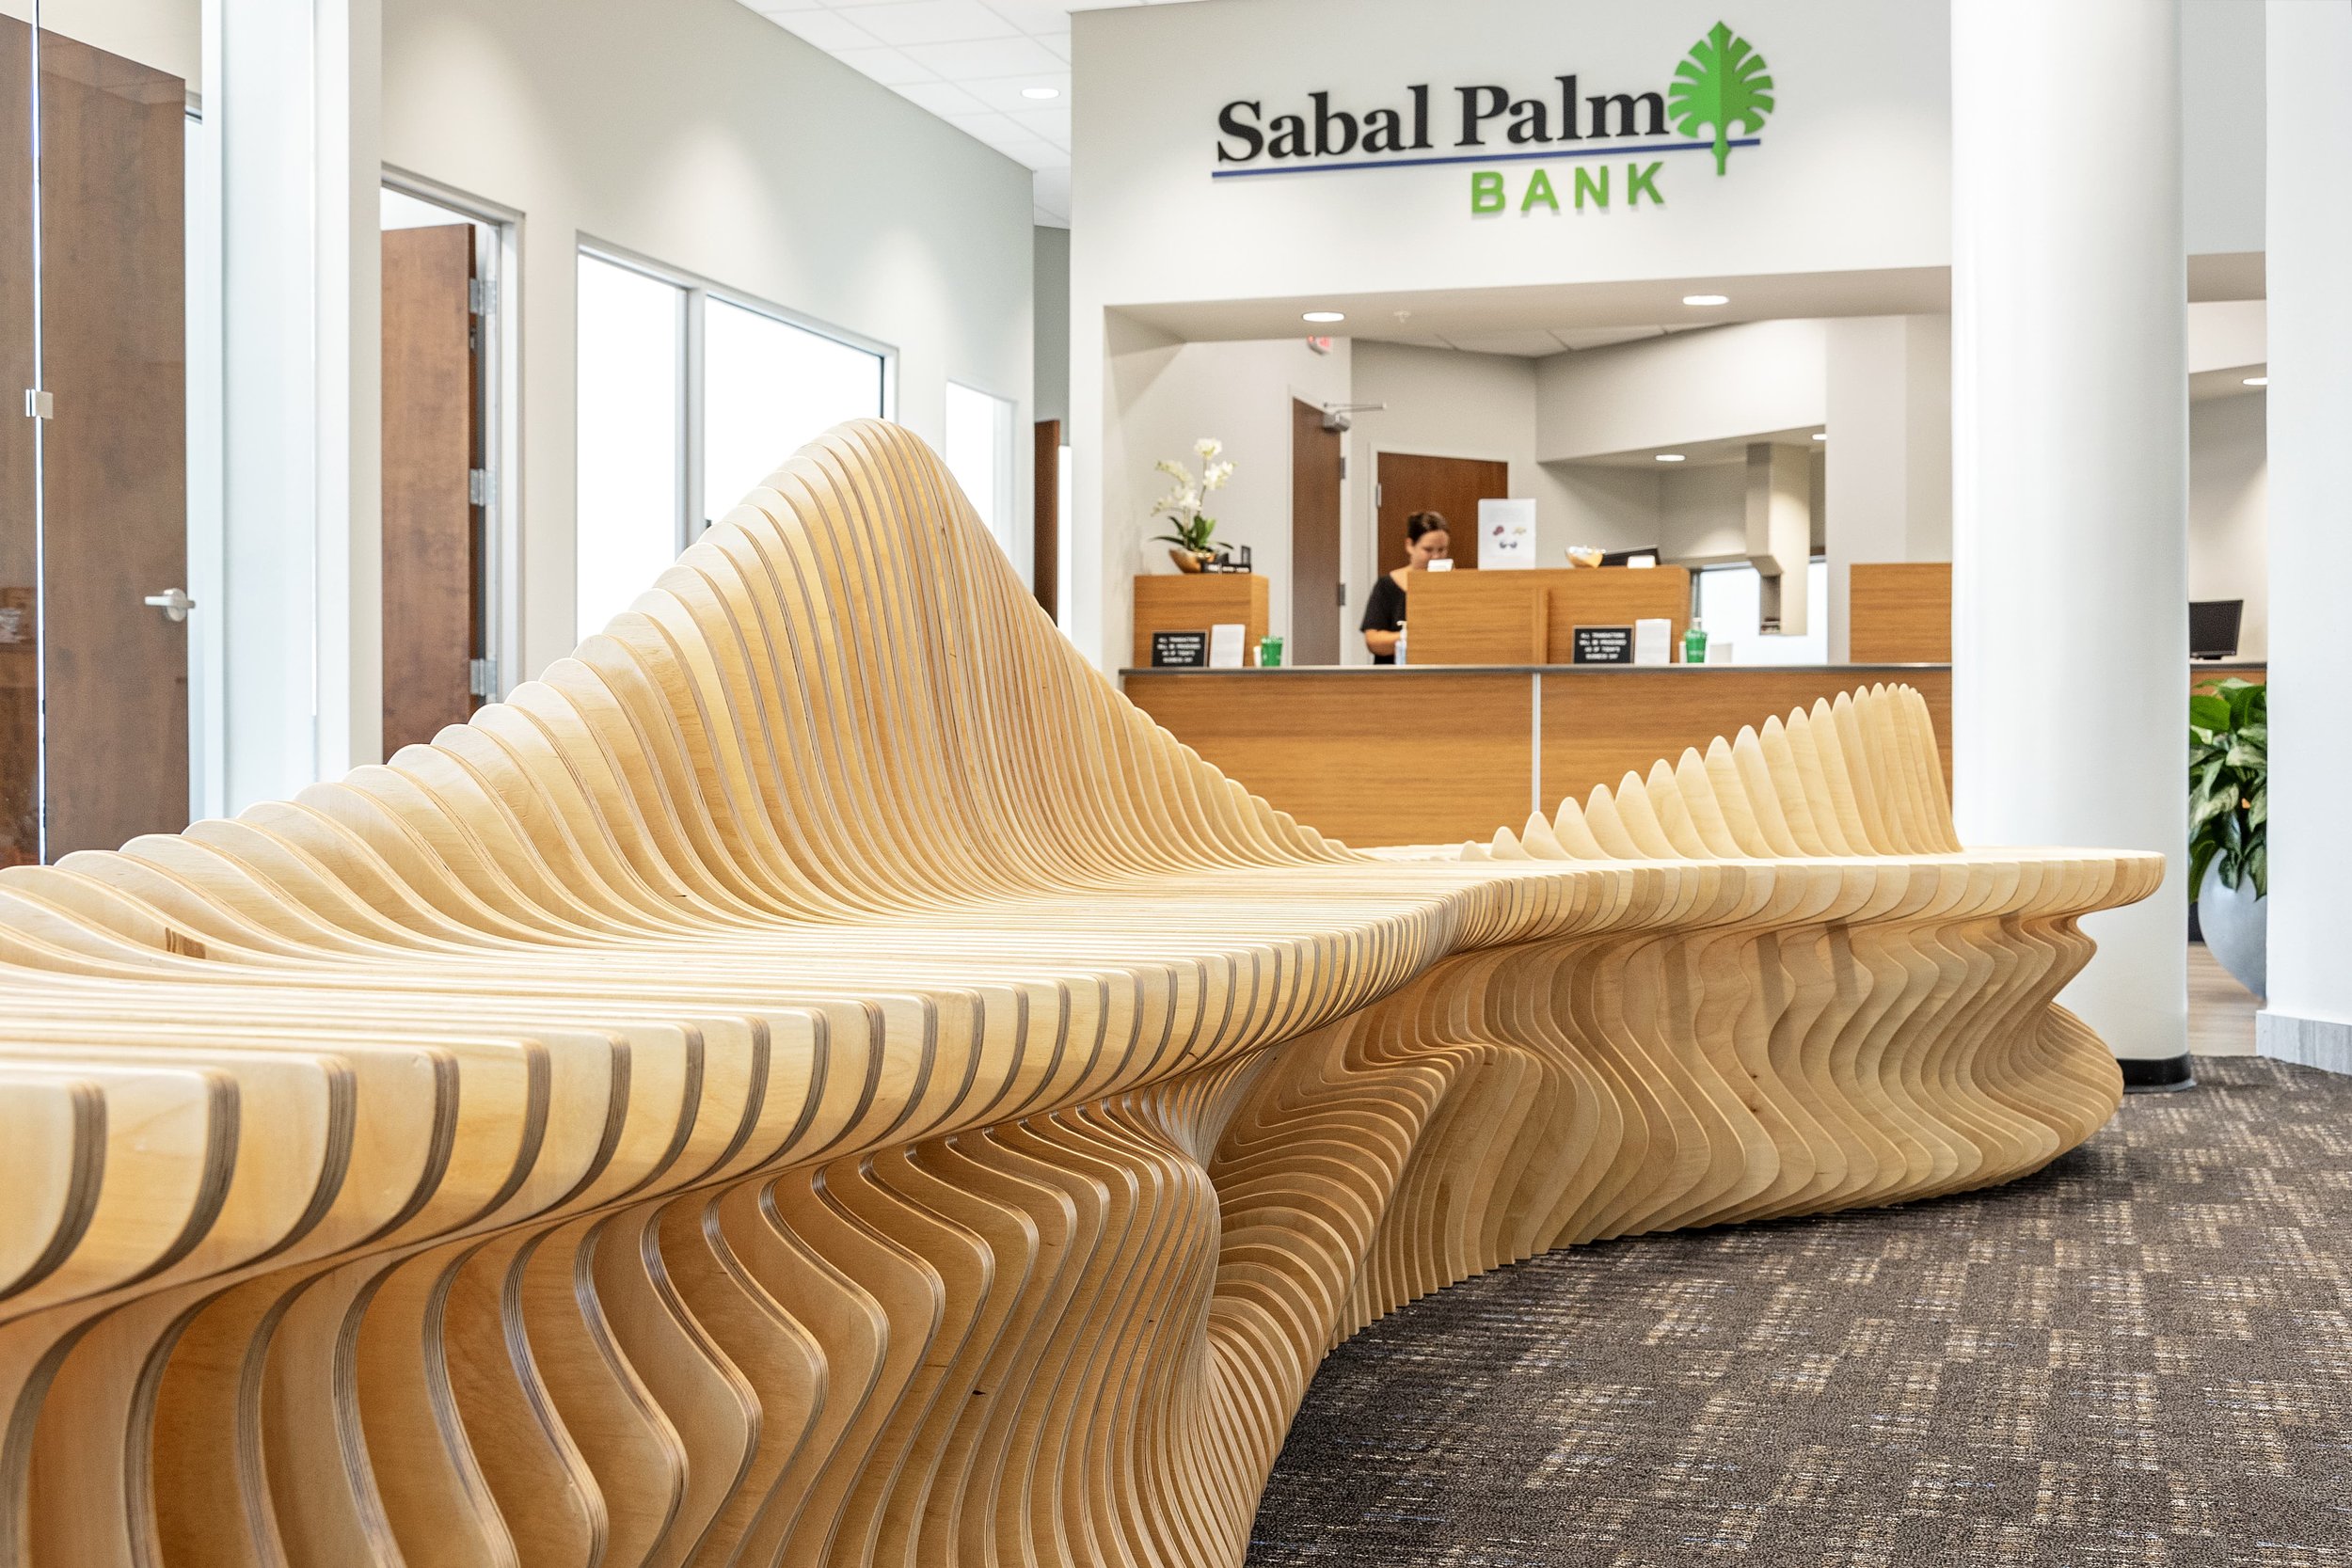 Parametric CNC Bench in Sabal Palm Bank Lobby - perspective view